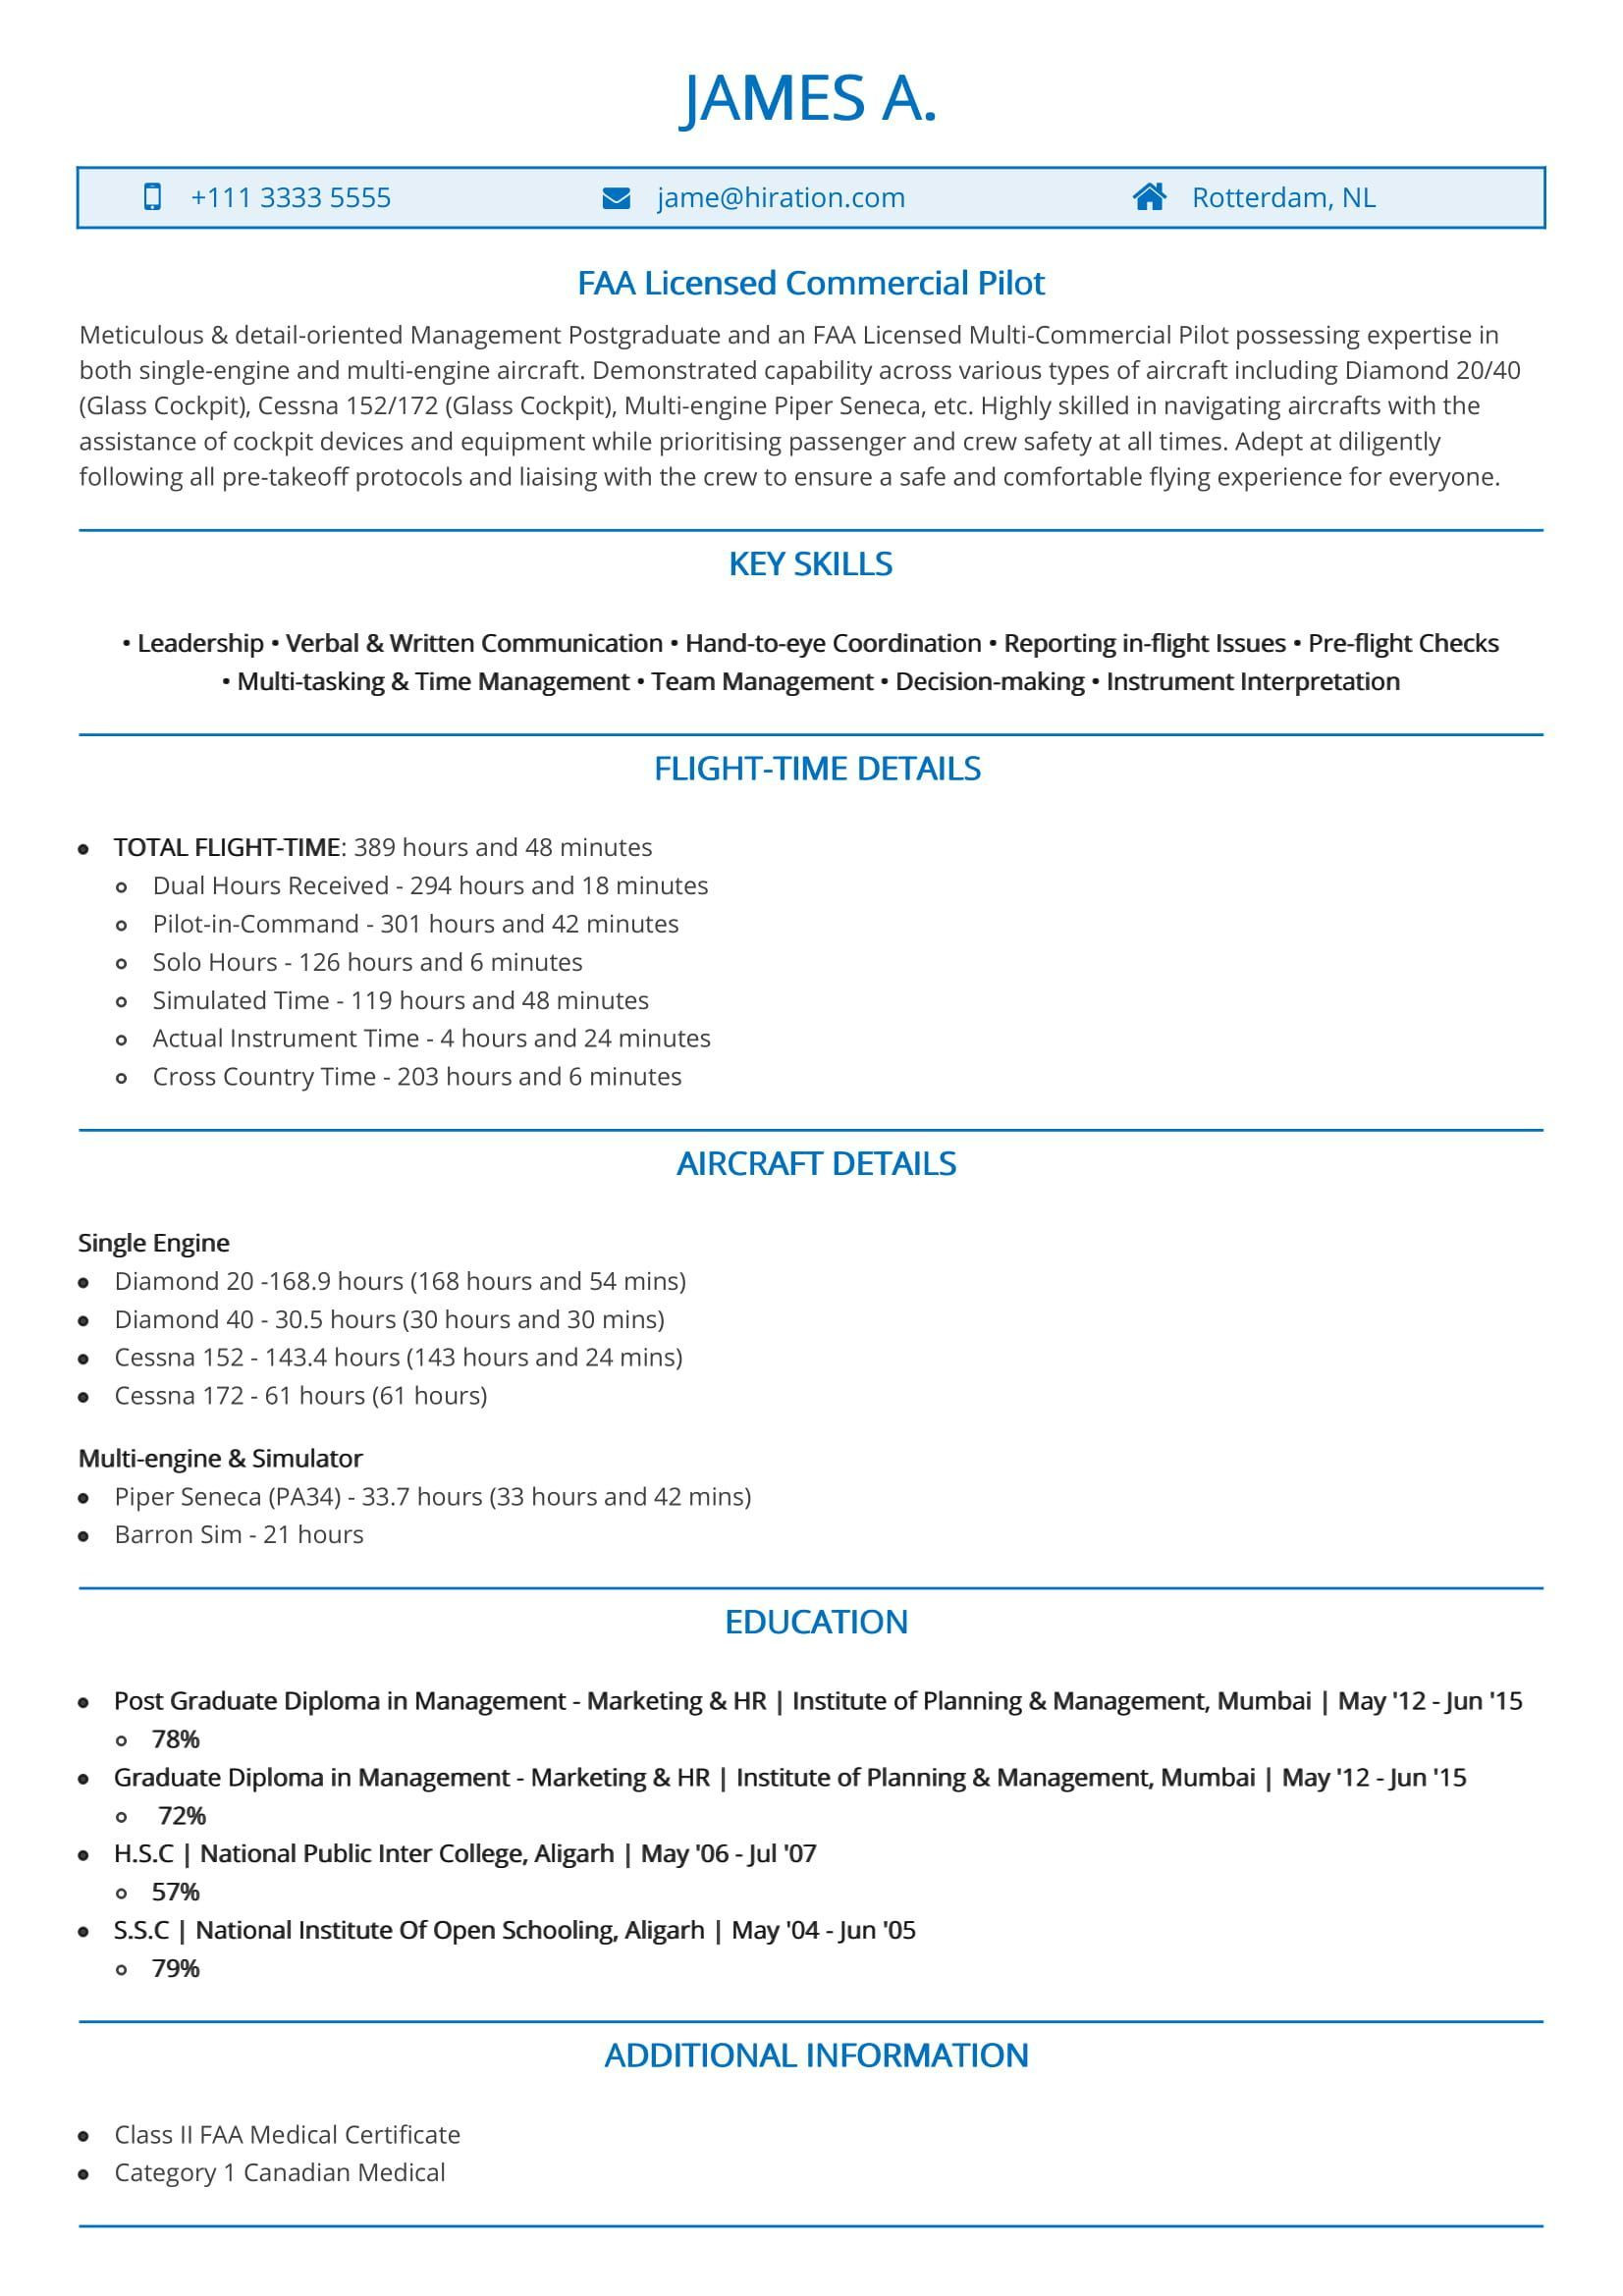 Sample Resume with No Relevant Experience How to Write A Resume with No Experience: Writing Your First Resume